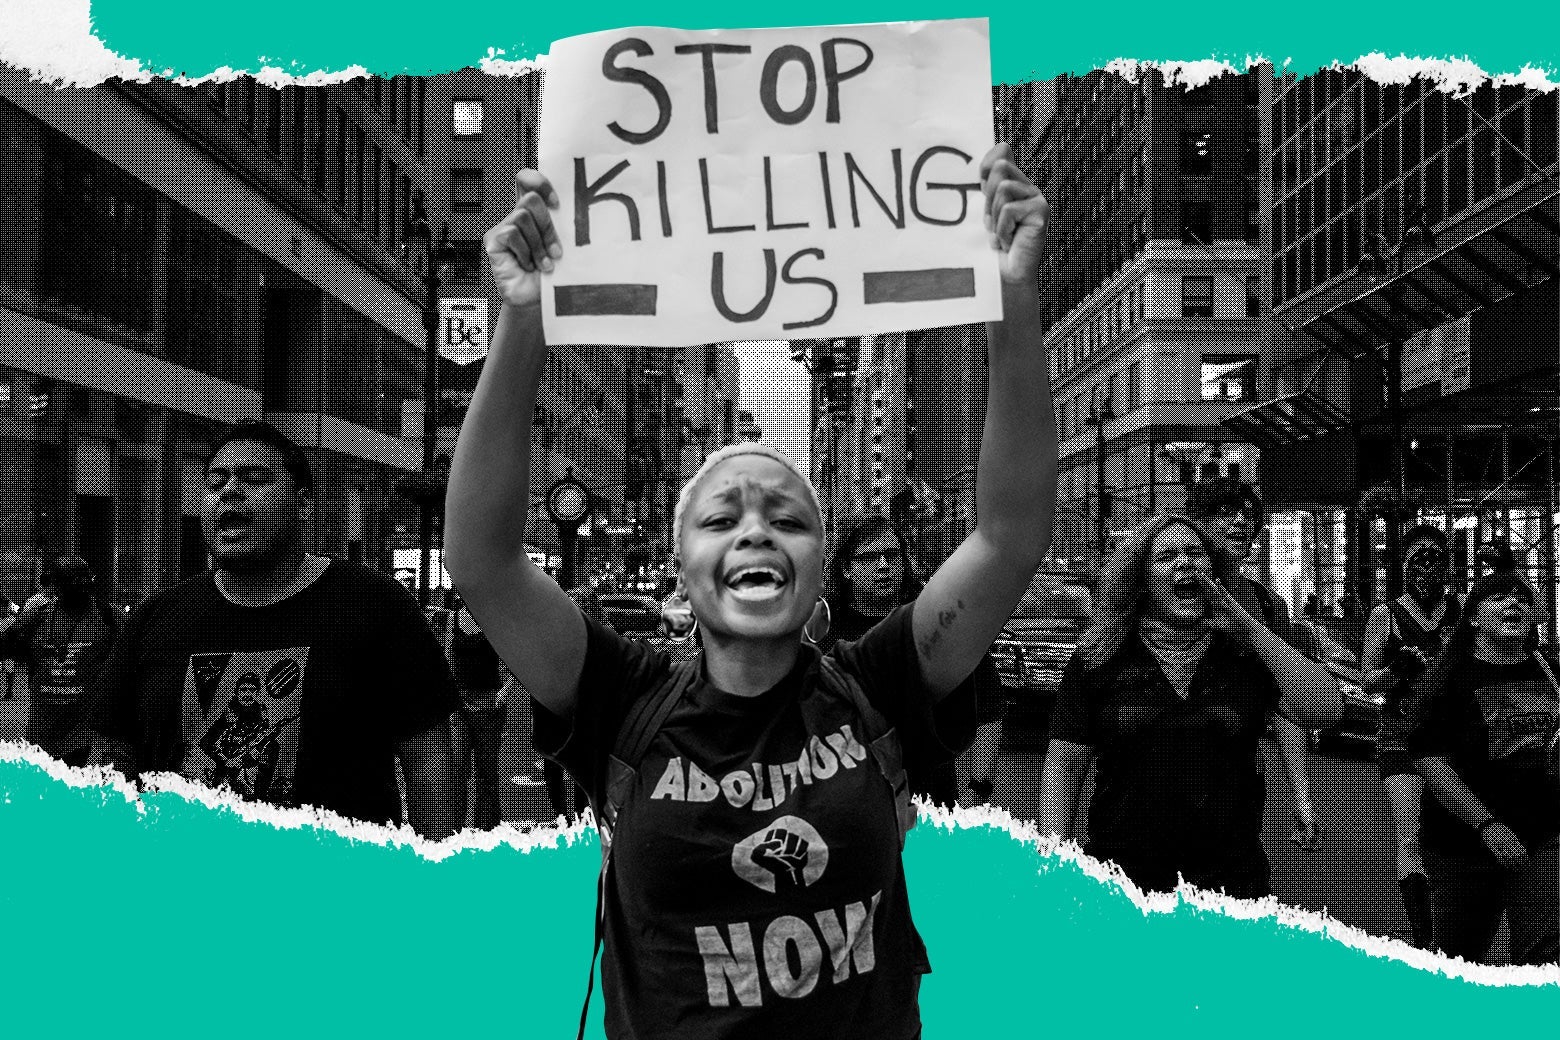 Photo illustration of a Black female protester carrying a sign that says "Stop Killing Us" while wearing a shirt that says "Abolition Now."